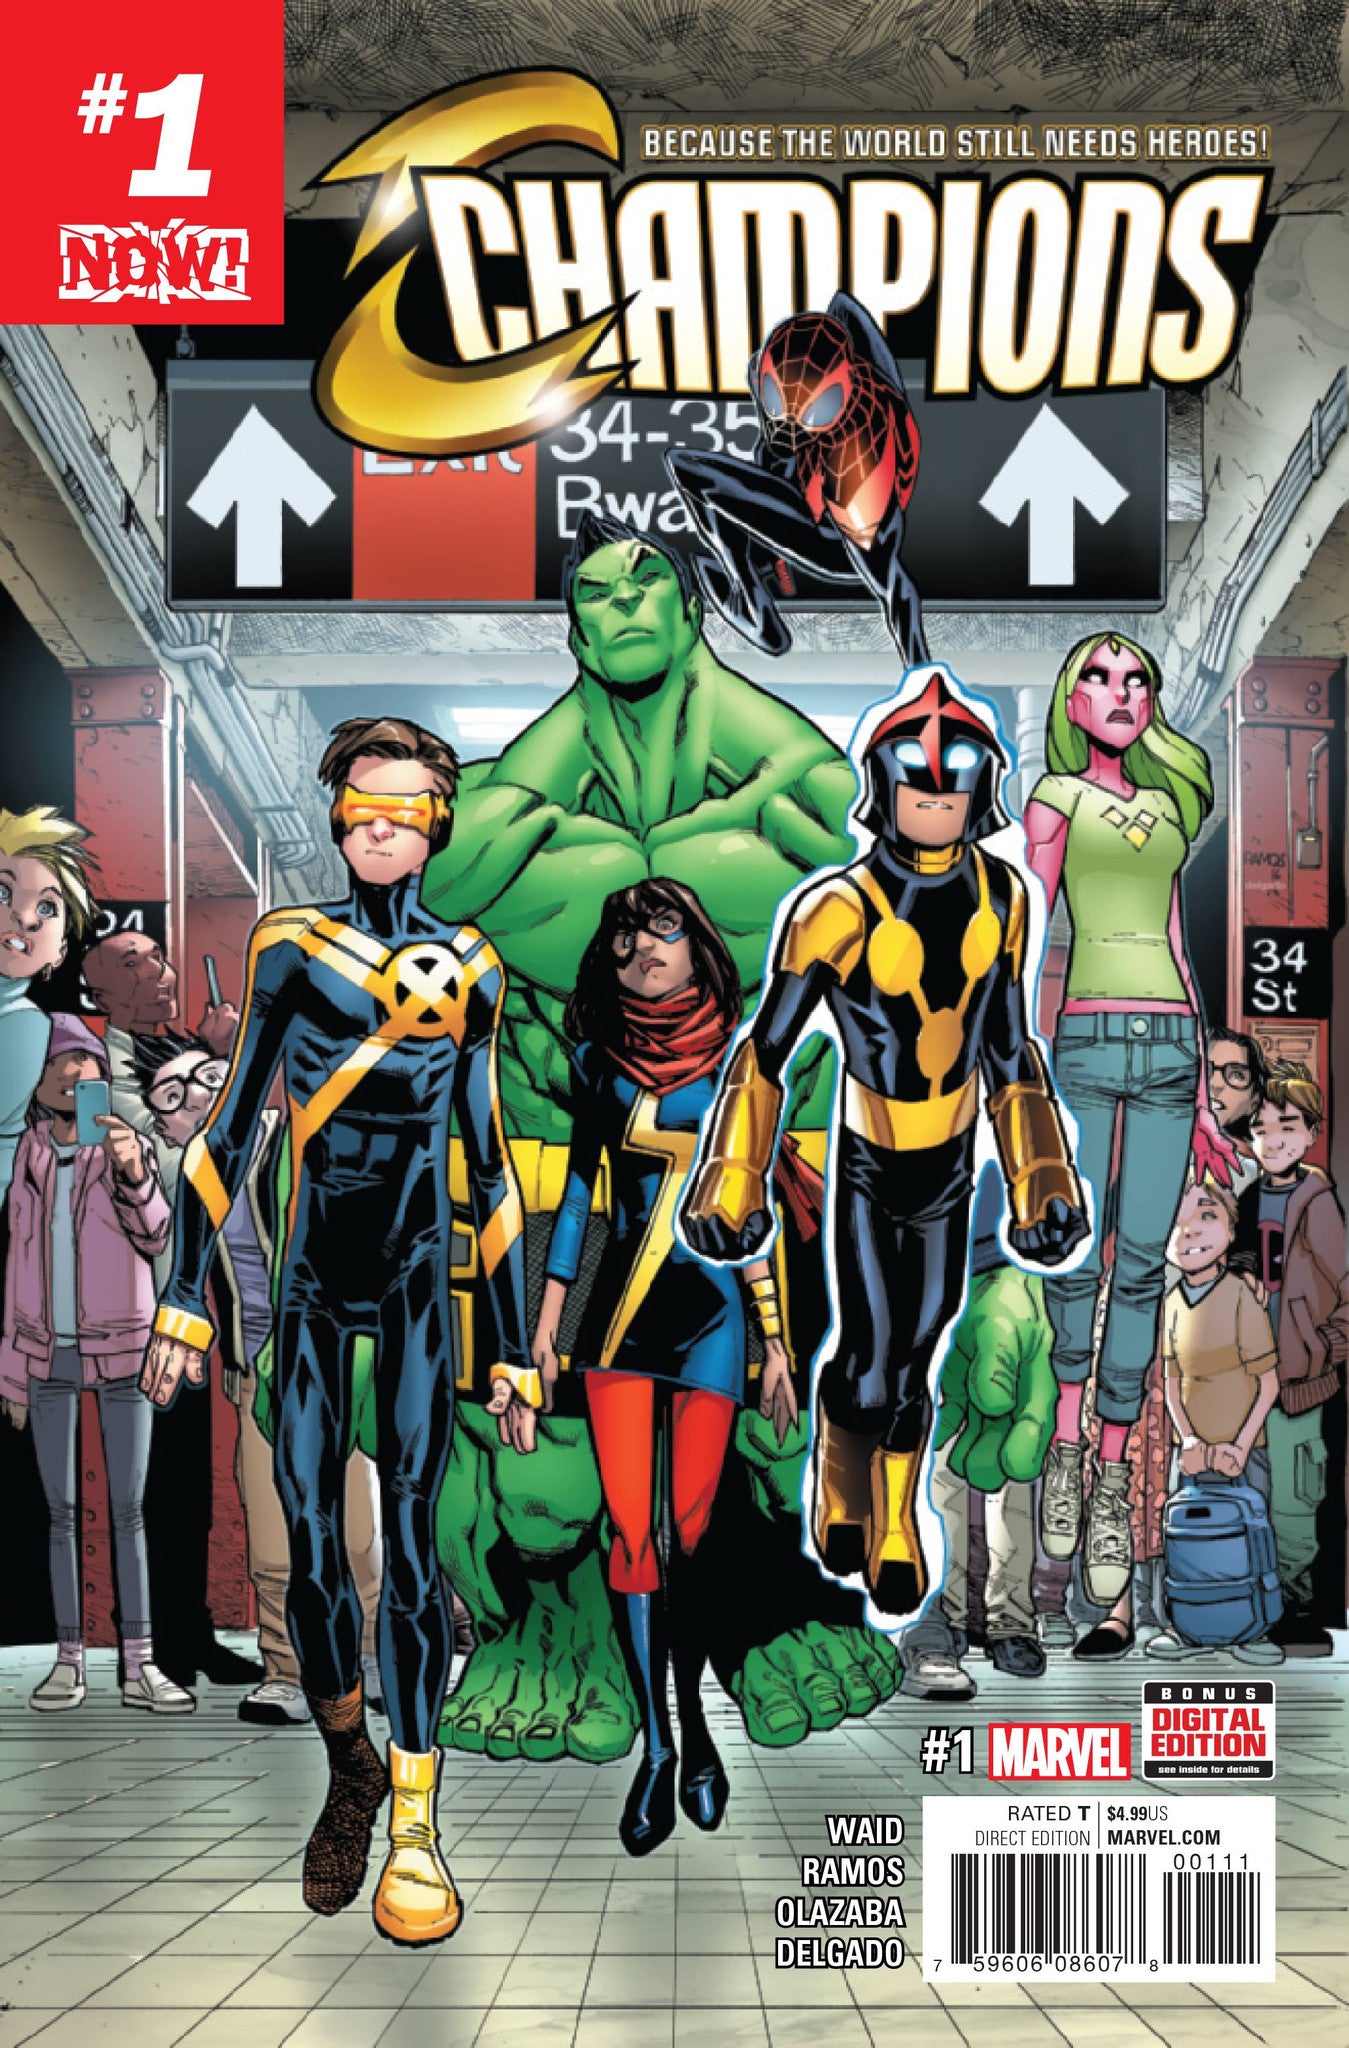 CHAMPIONS #1 NOW COVER